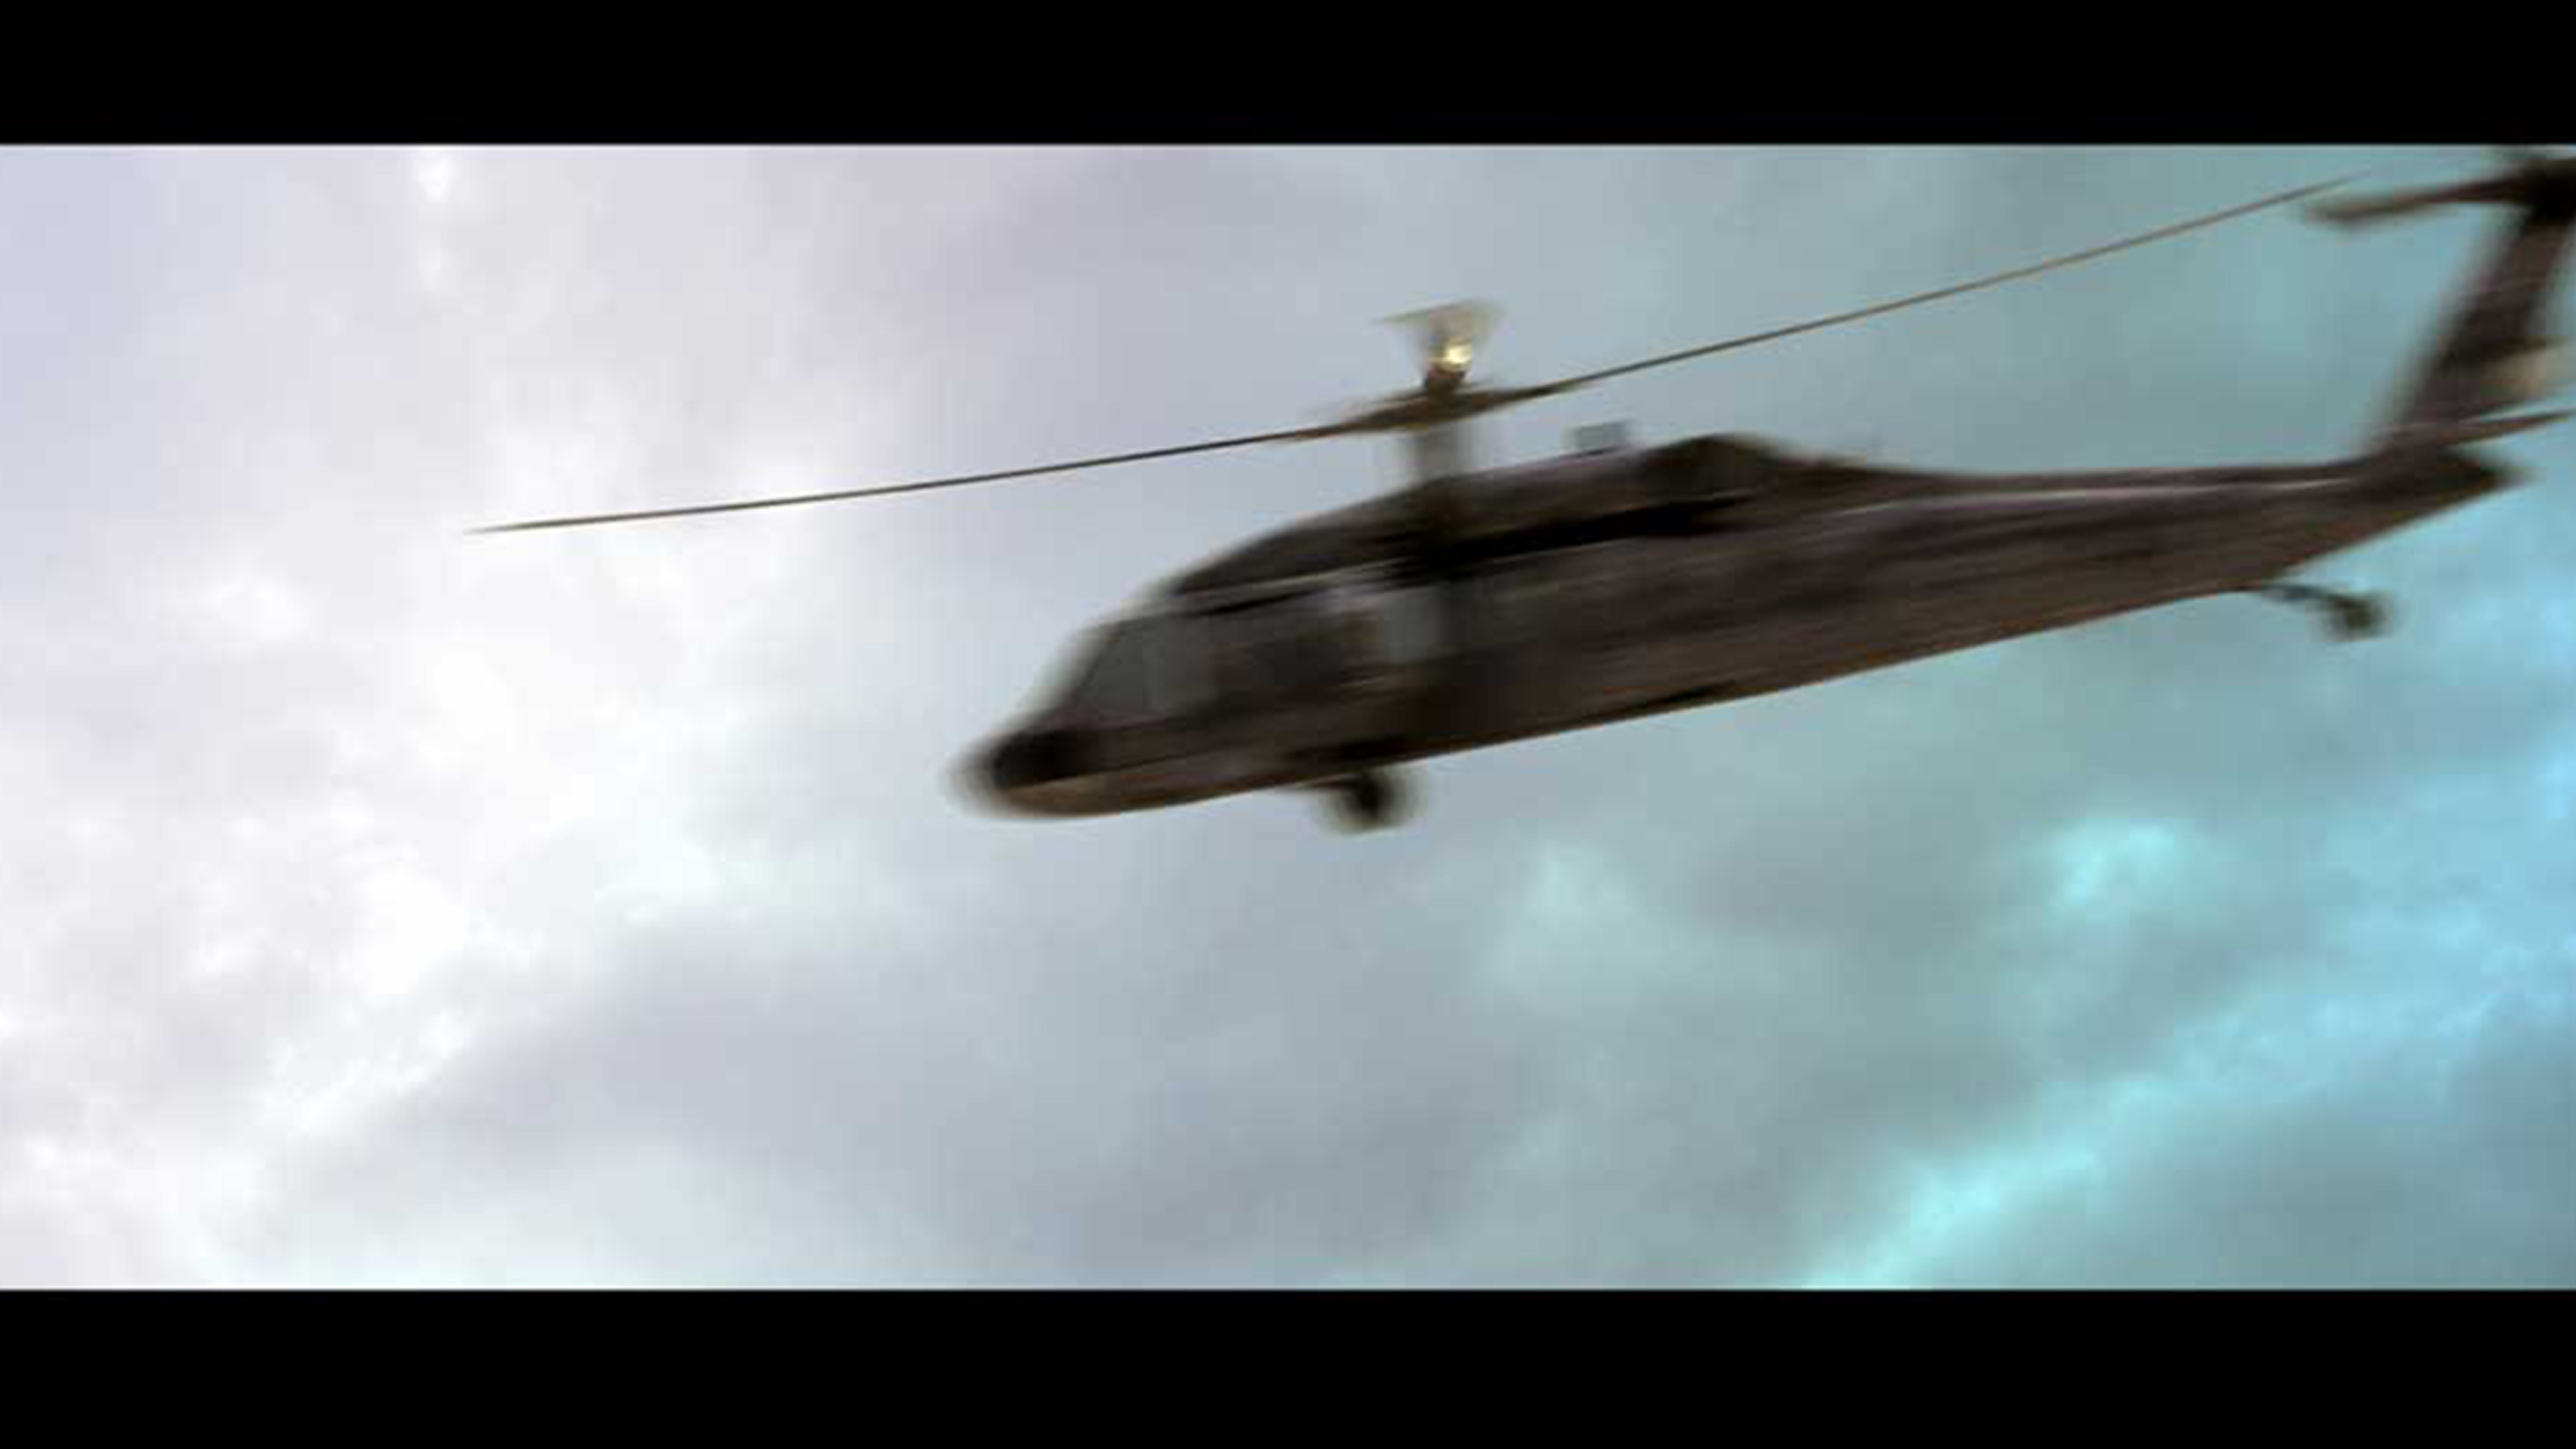 Copter for composite in video 2012